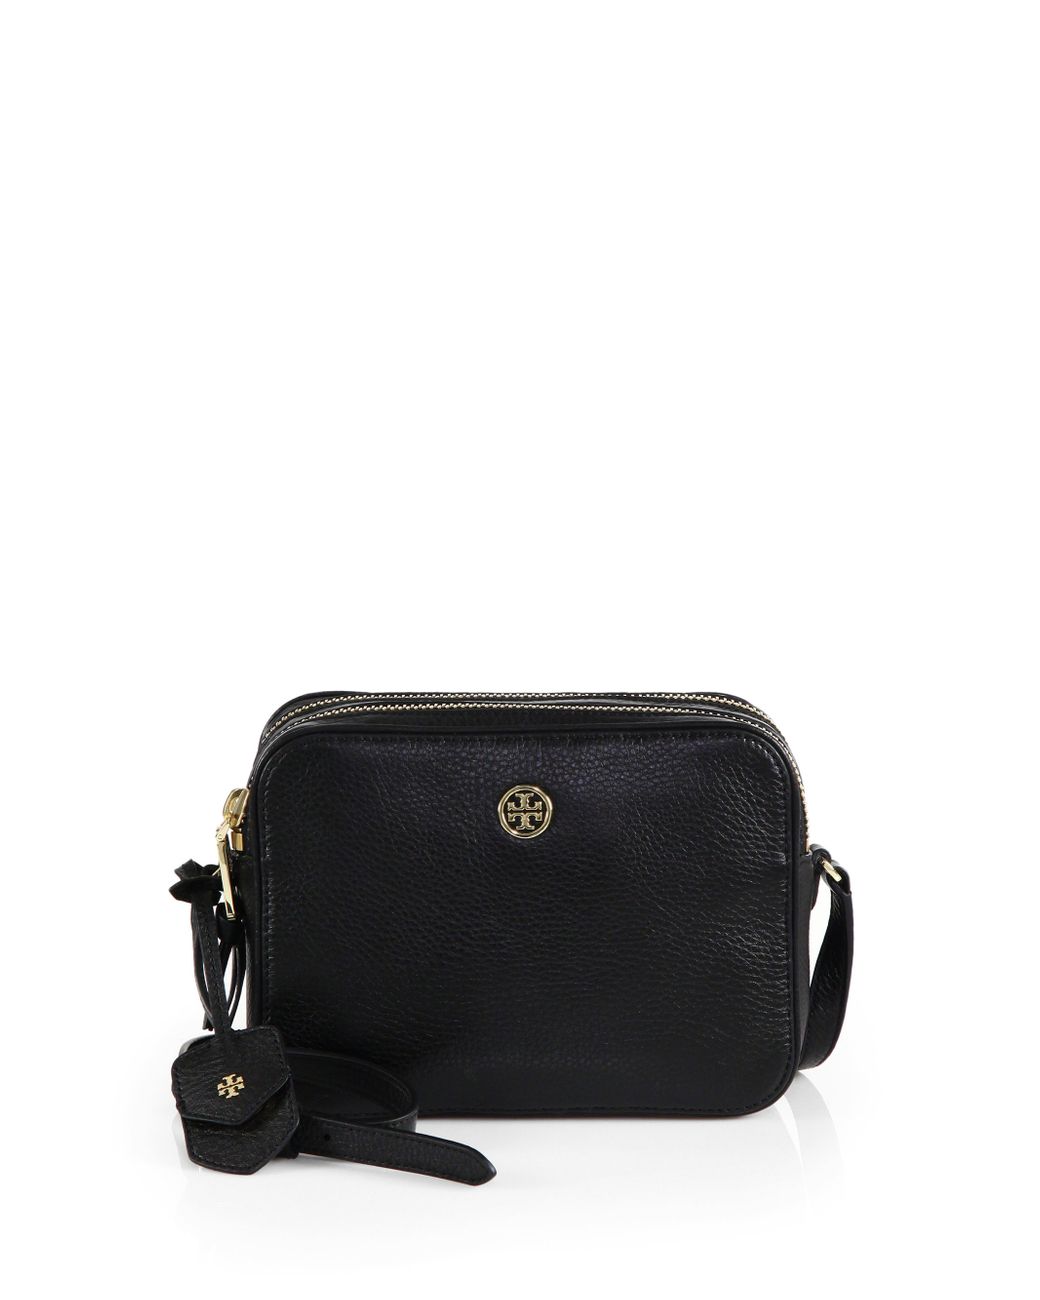 Tory Burch 'robinson' Double Zip Leather Crossbody Bag in Blue